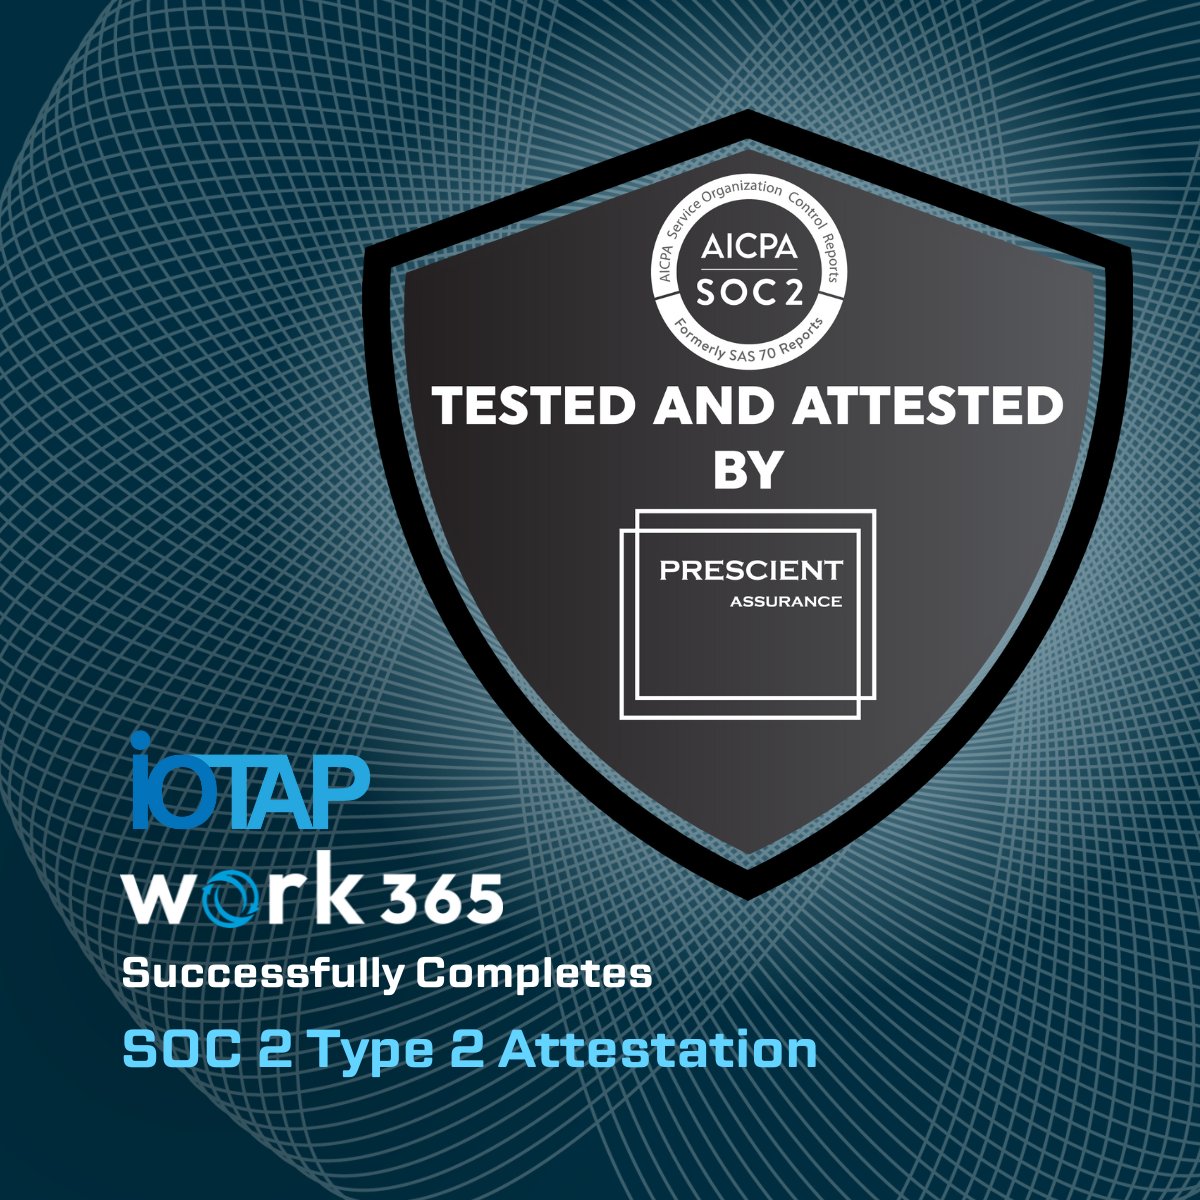 IOTAP Inc. (Work 365) has achieved a major milestone by successfully completing SOC 2 Type 2 Attestation. Congratulations to the entire team for their dedication to security and compliance. work365apps.com/soc-2-type-2-c… #Work365 #SOC2 #MilestoneAchieved #soc #security #privacy